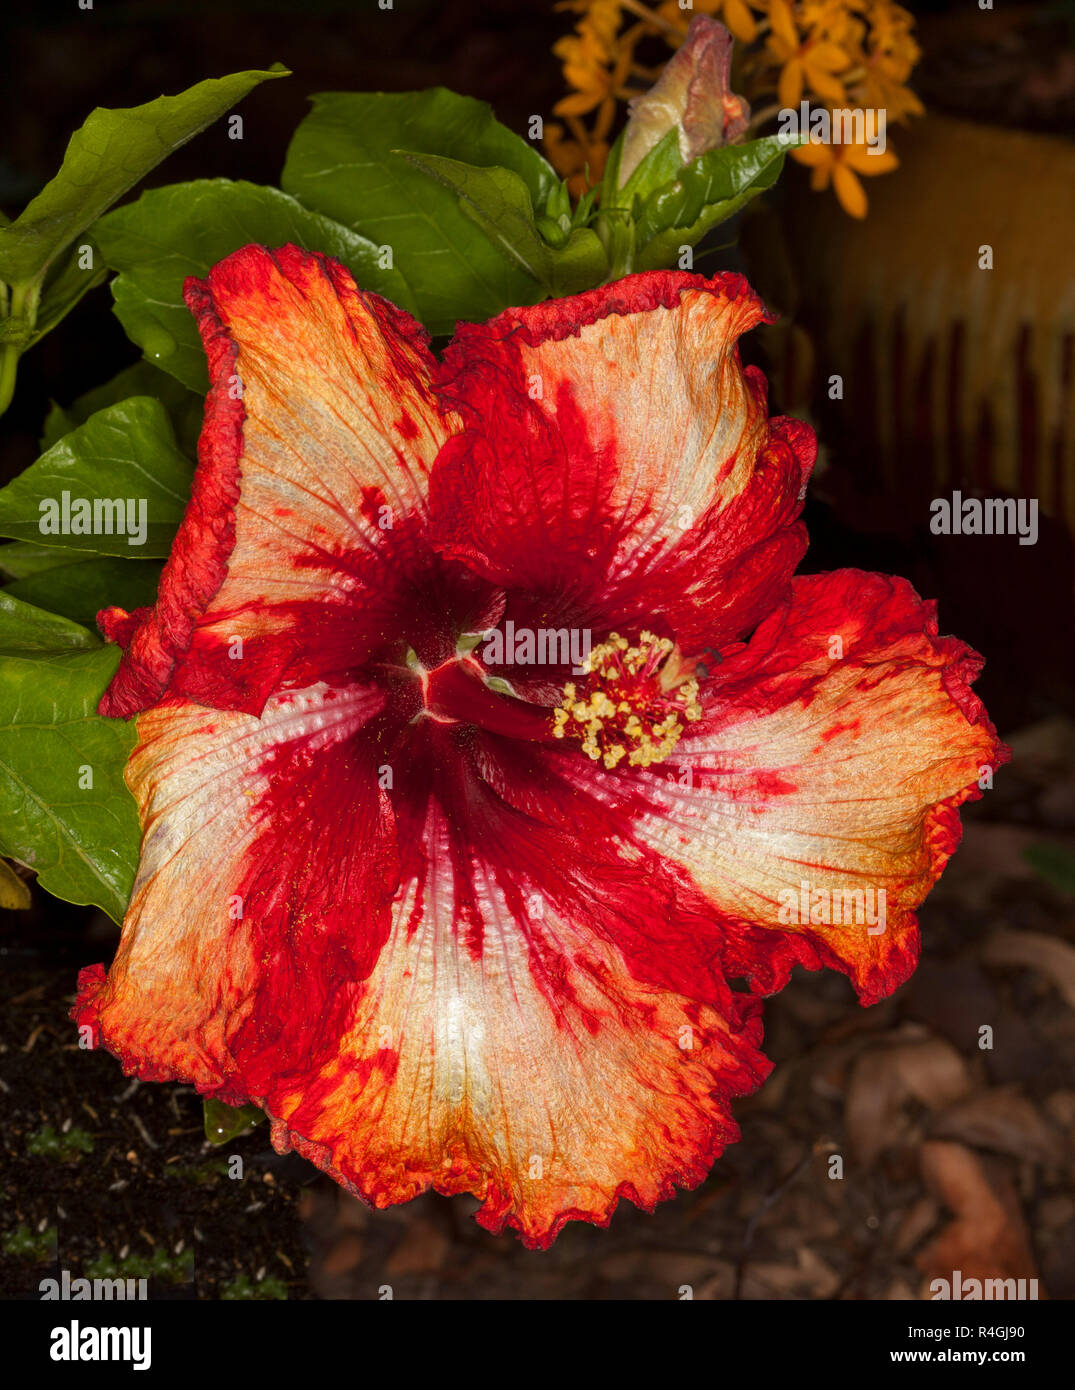 Spectacular vivid red and orange flower and bright green leaves of Hibiscus 'Milo' on dark background Stock Photo